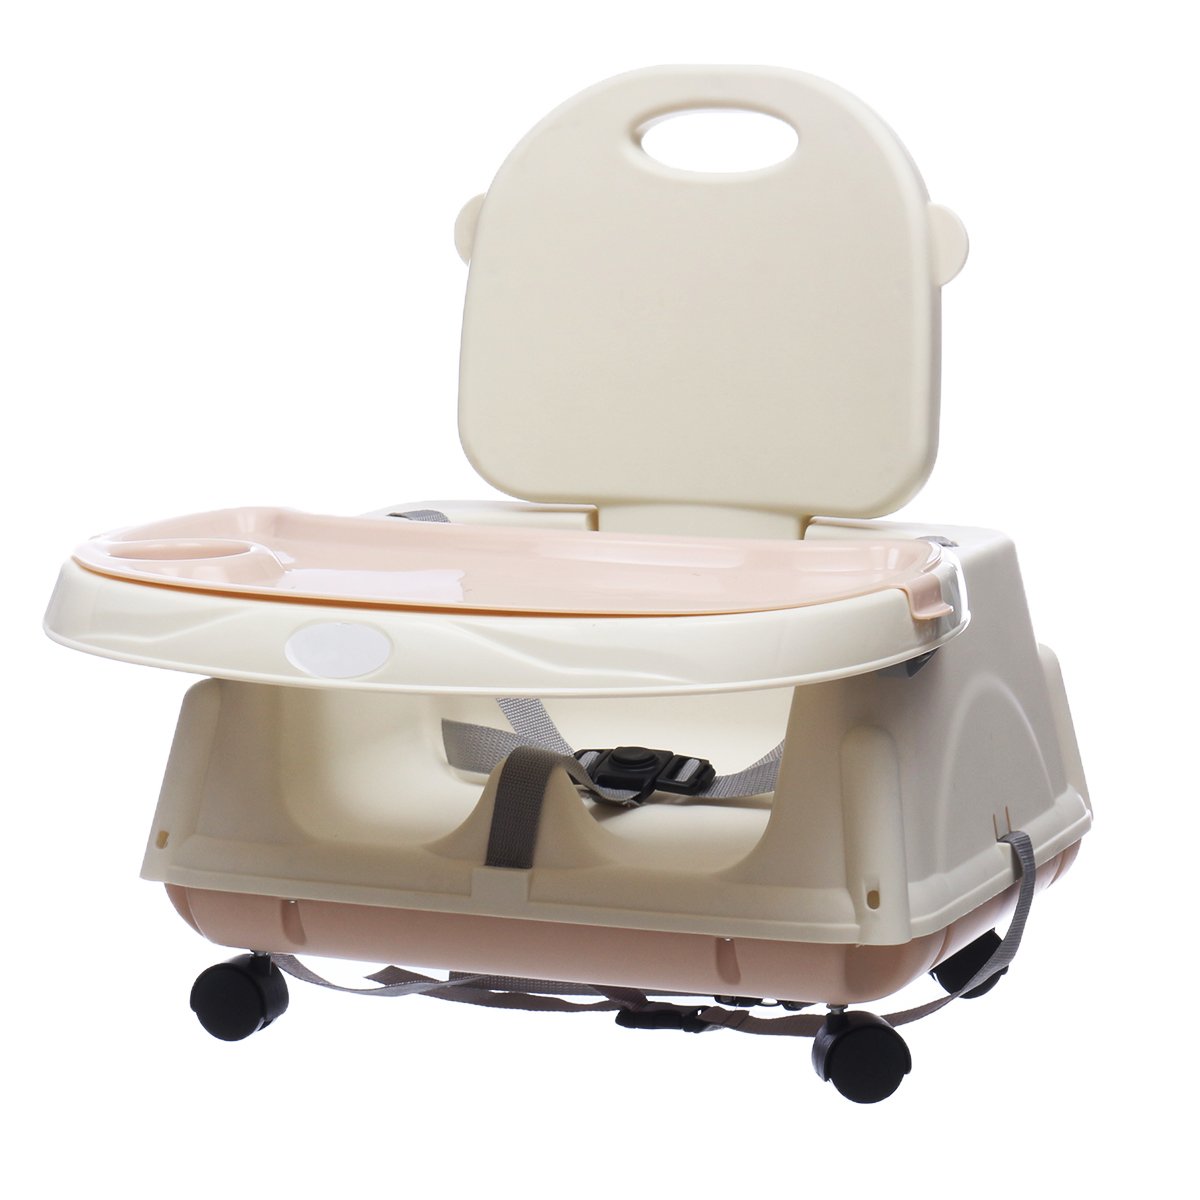 Folding-Baby-High-Chair-Convertible-Play-Table-Seat-Booster-Toddler-Feeding-Tray-Wheel-1556091